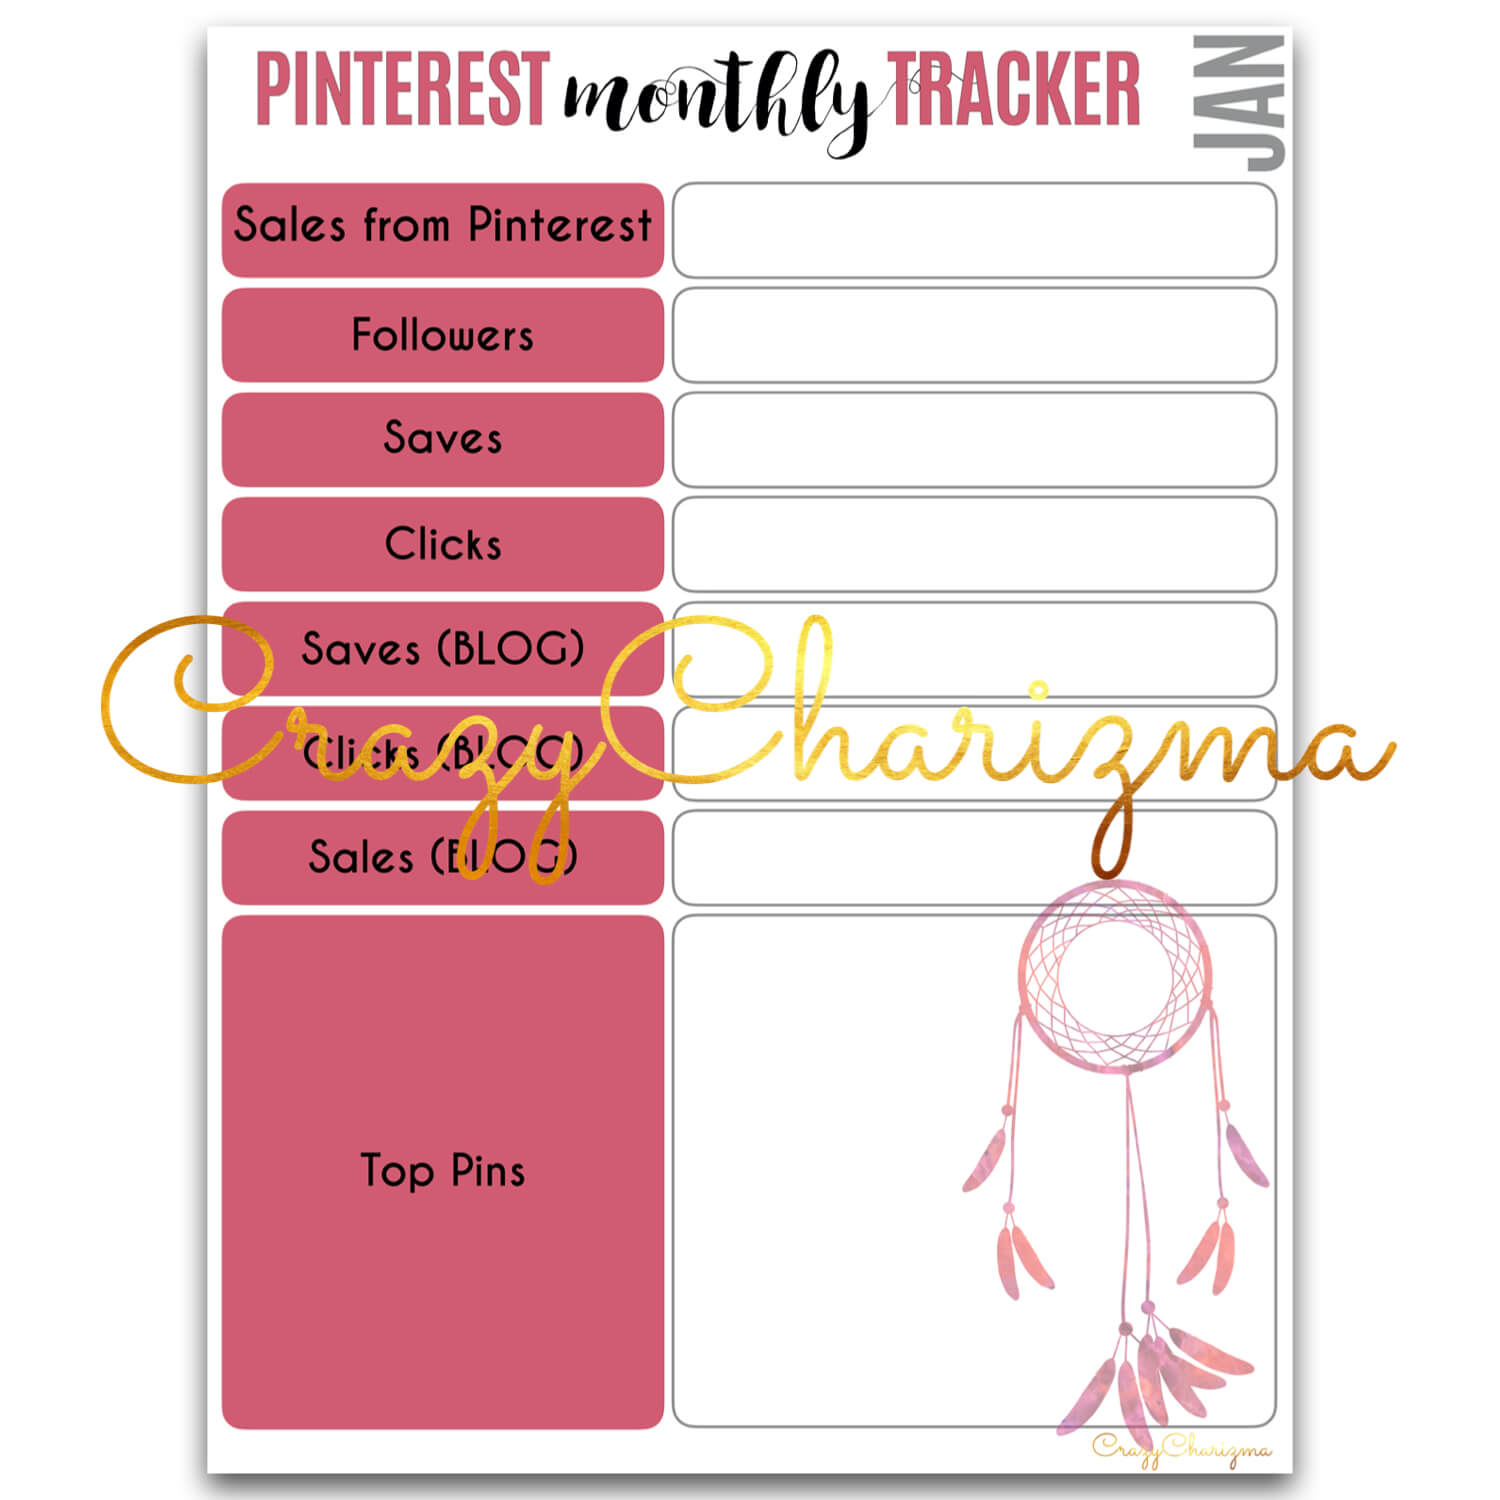 If you take TPT seriously, you definitely track your business growth and stats. This TPT planner and seller binder will help you set your goals, plan your product creation, get the product creation list and marketing plan, track social media and email list stats. And so much more.